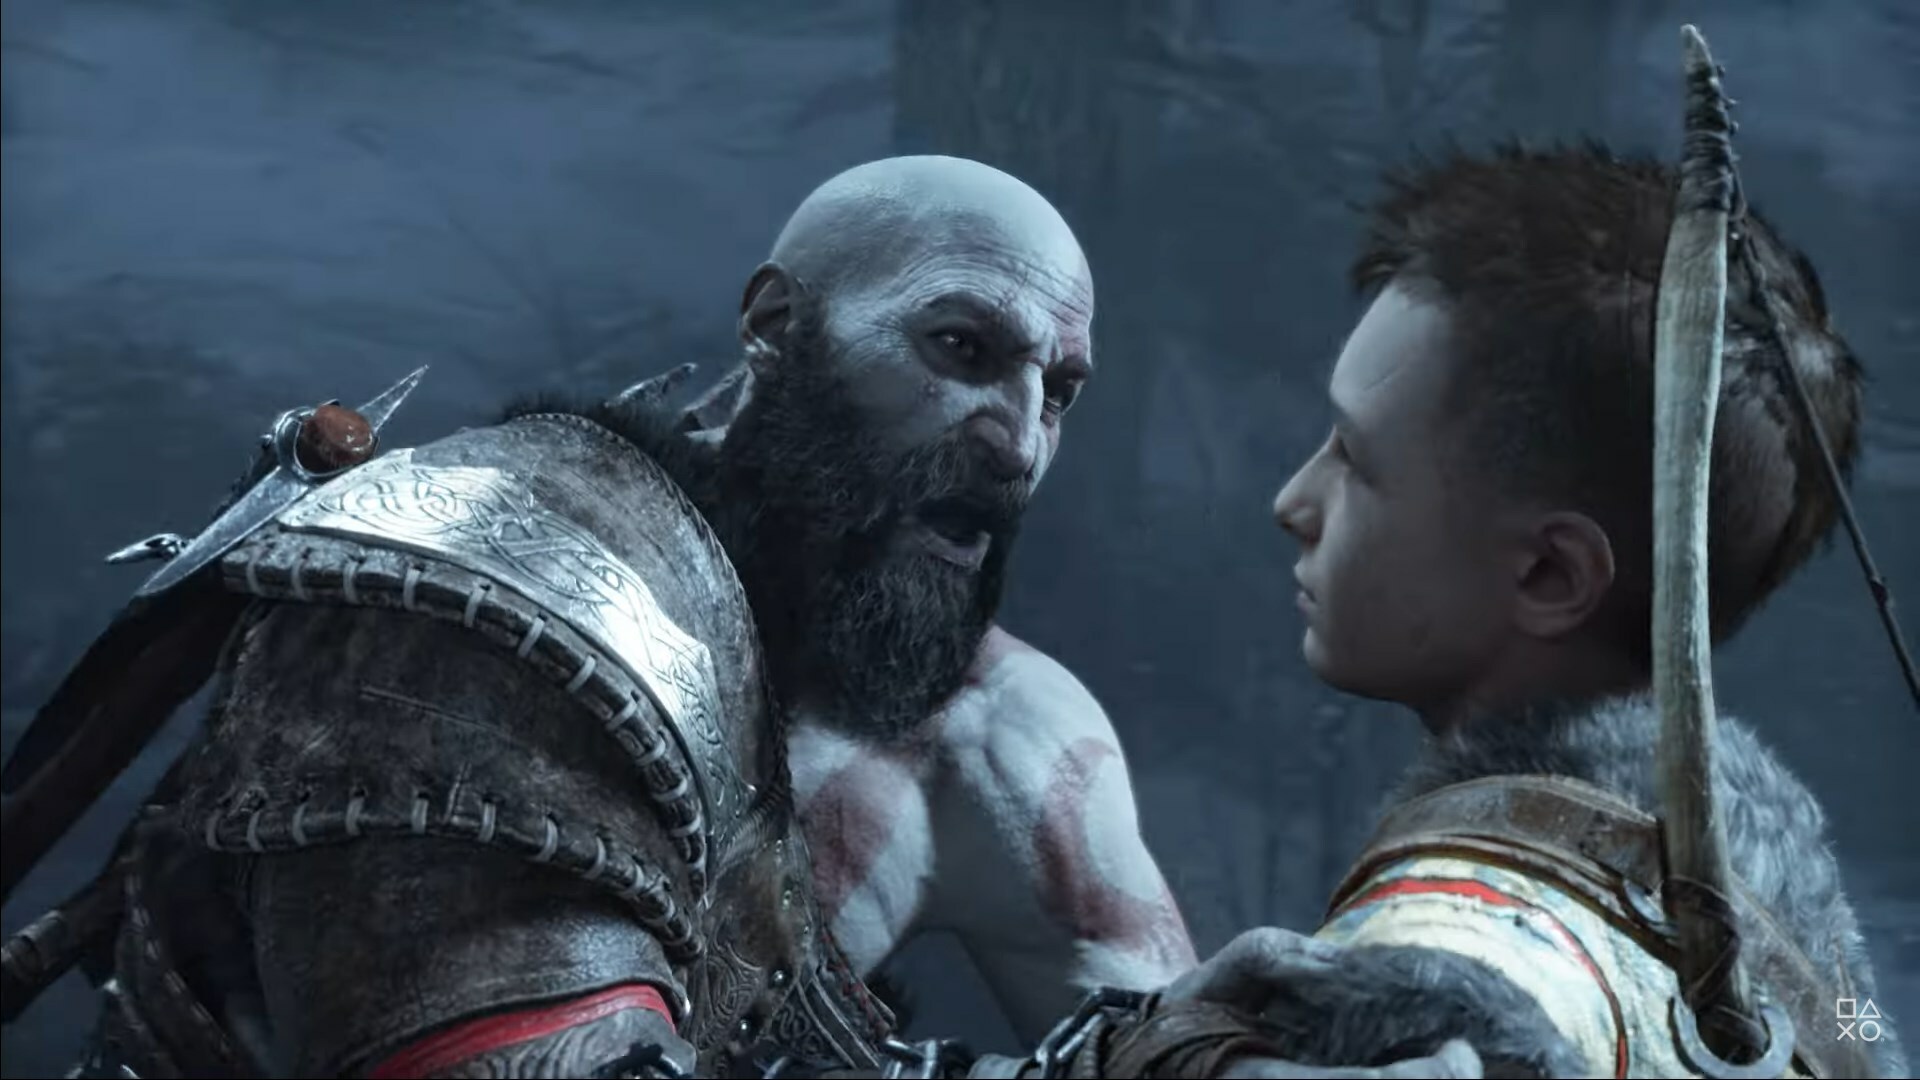 god-of-war-ragnar-k-will-add-new-game-plus-in-spring-earlygame